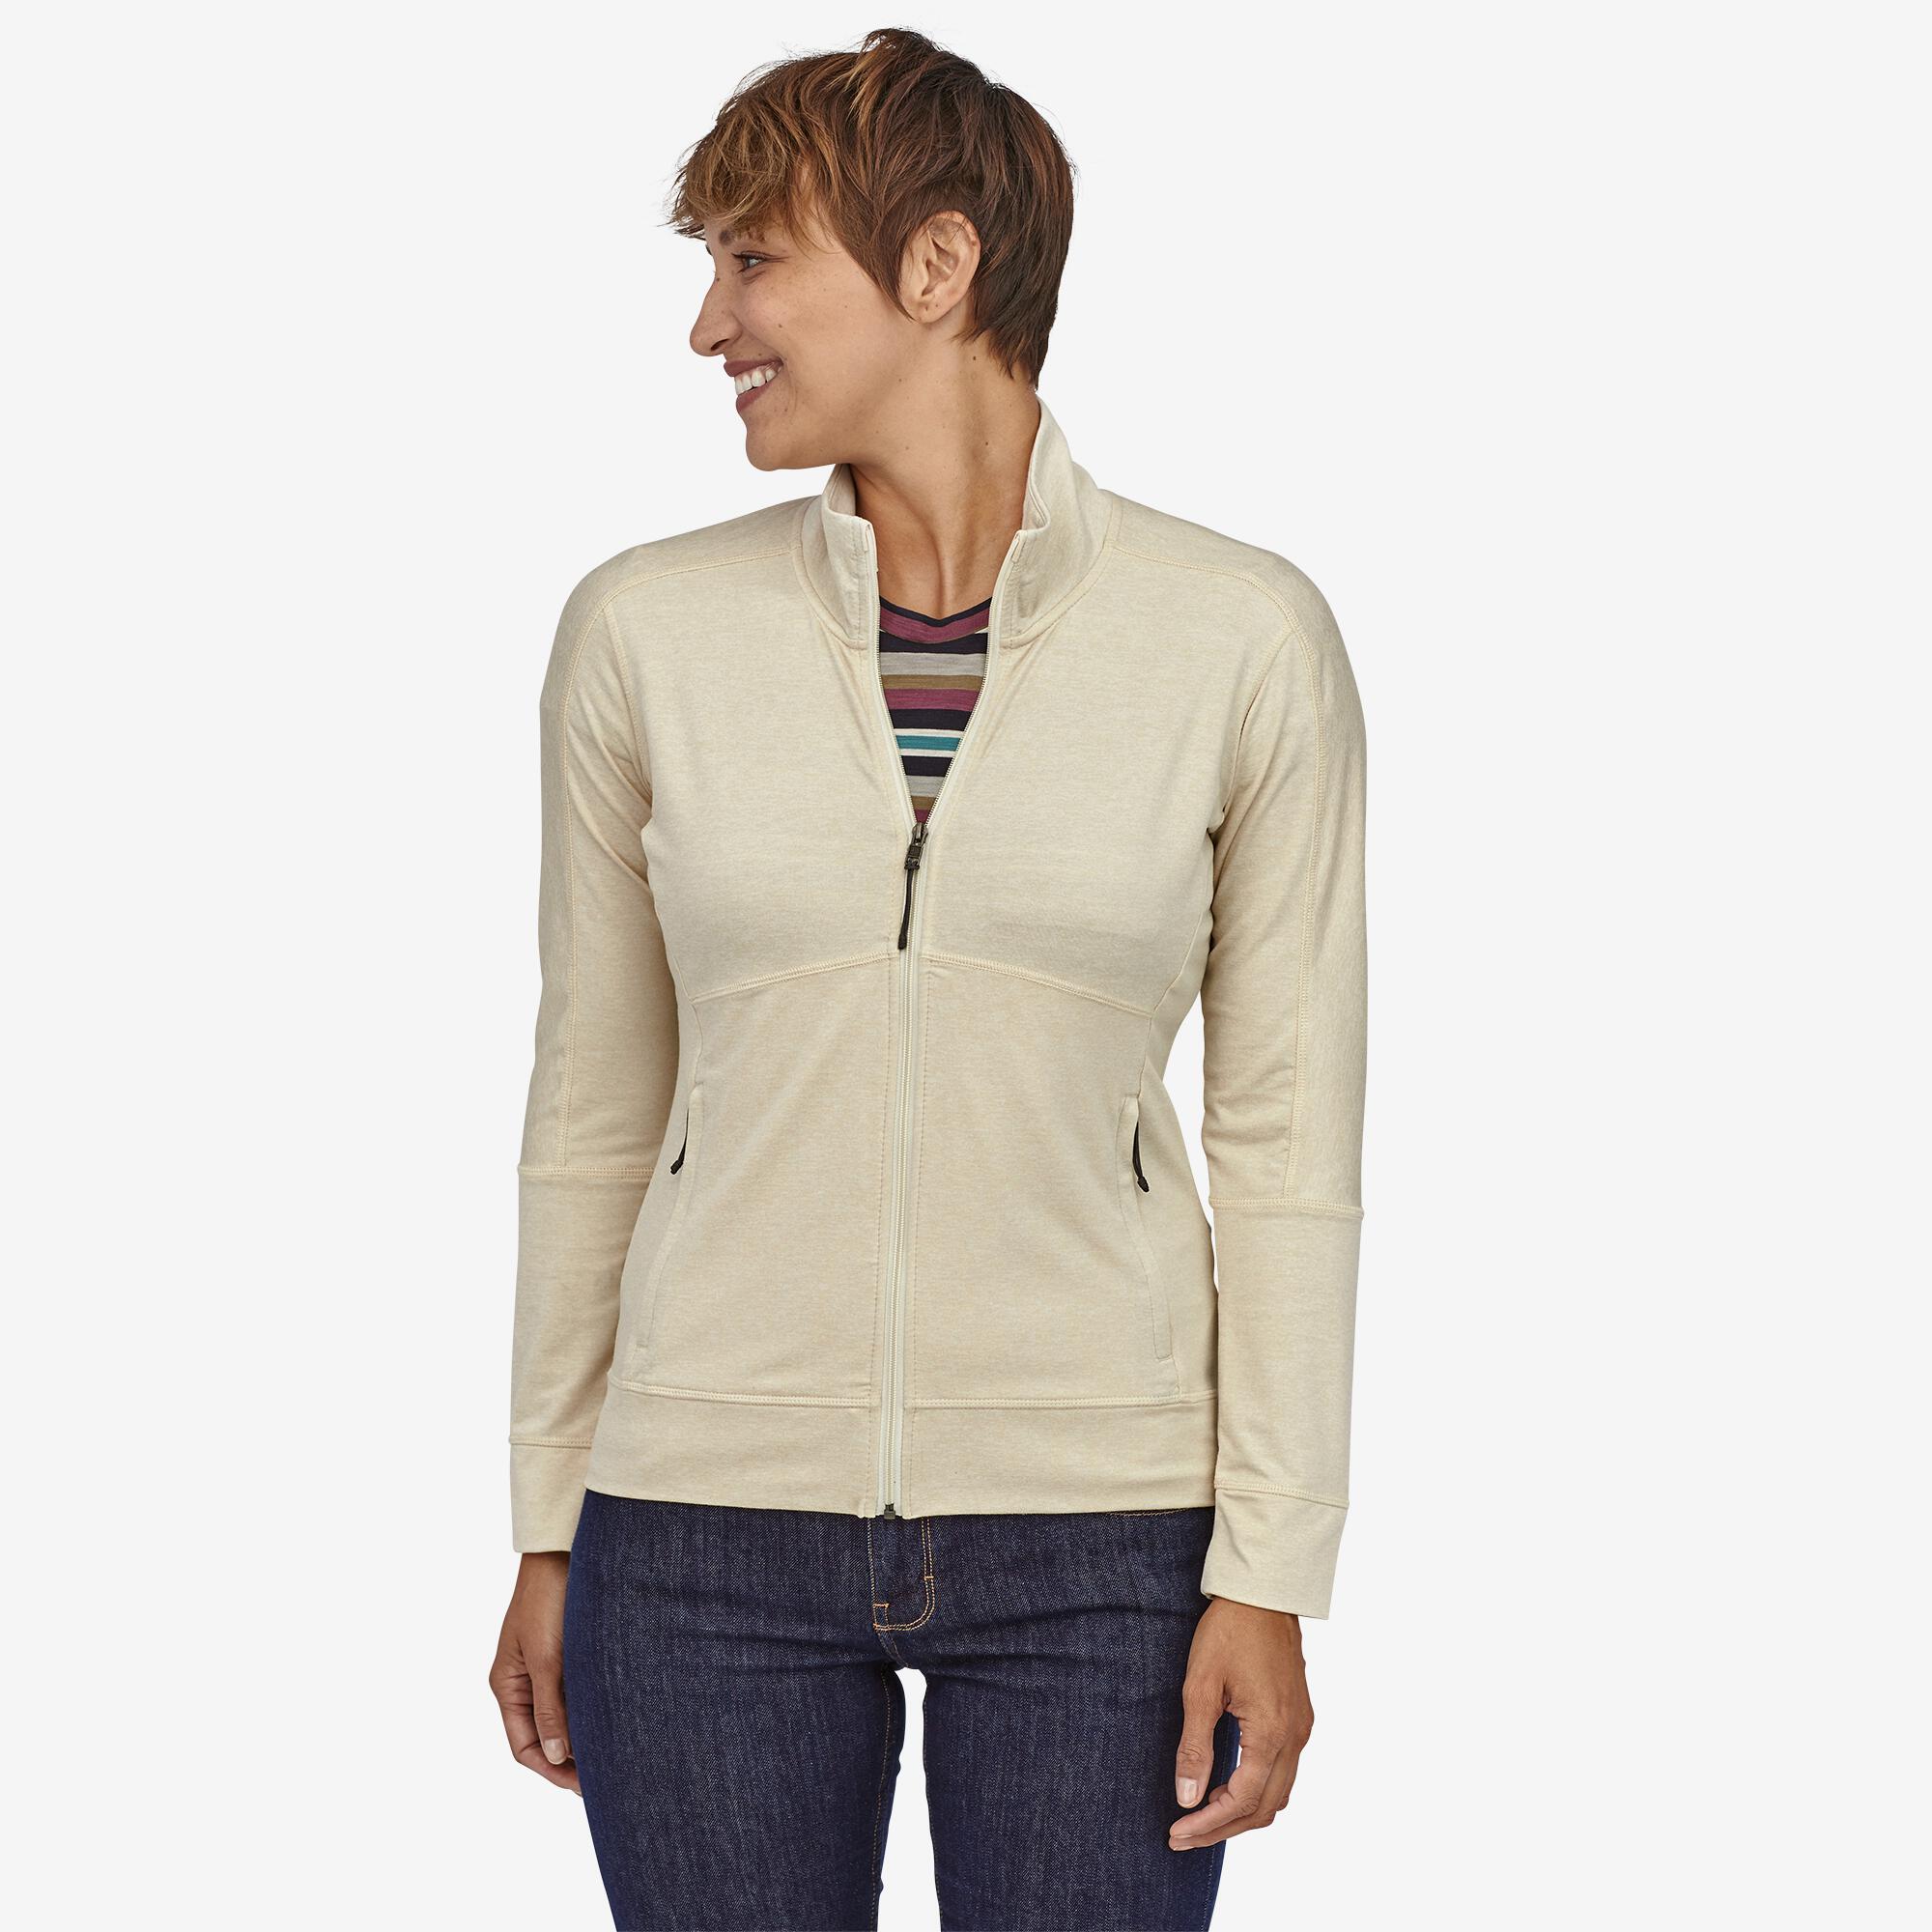 Patagonia Women's Seabrook Jacket, Oyster White / S